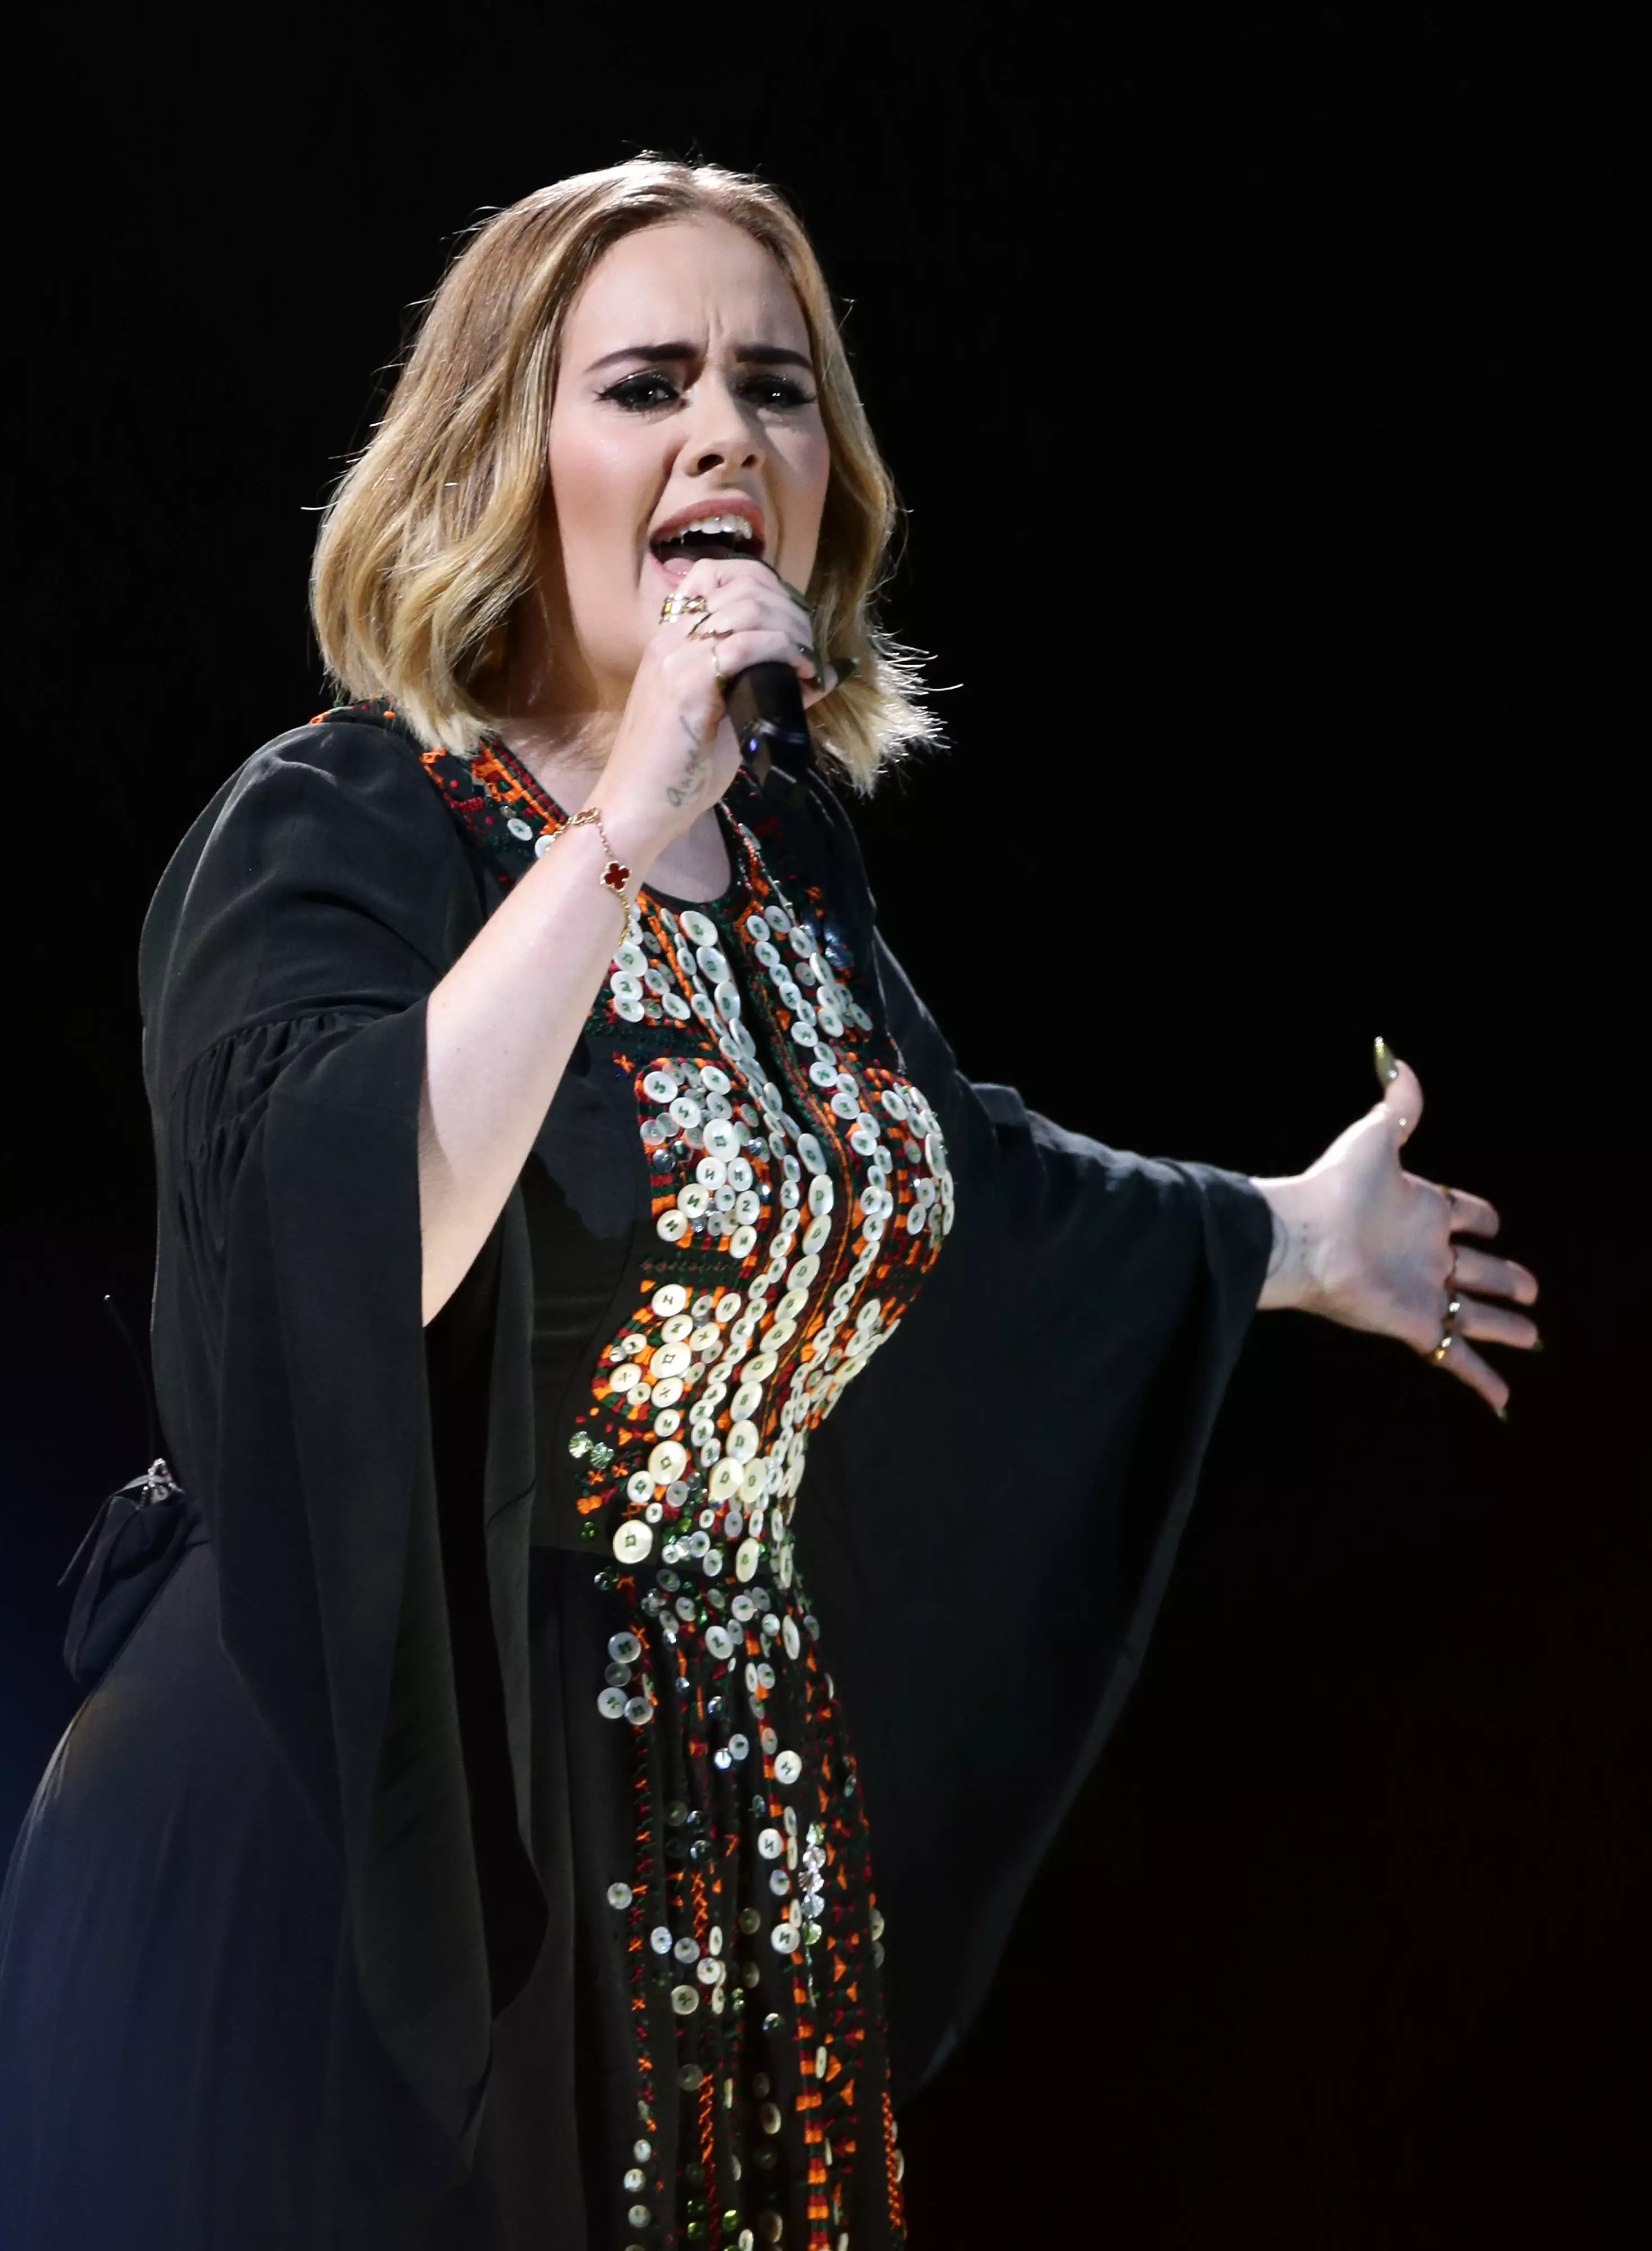 Adele has lost an incredible 7 stone.